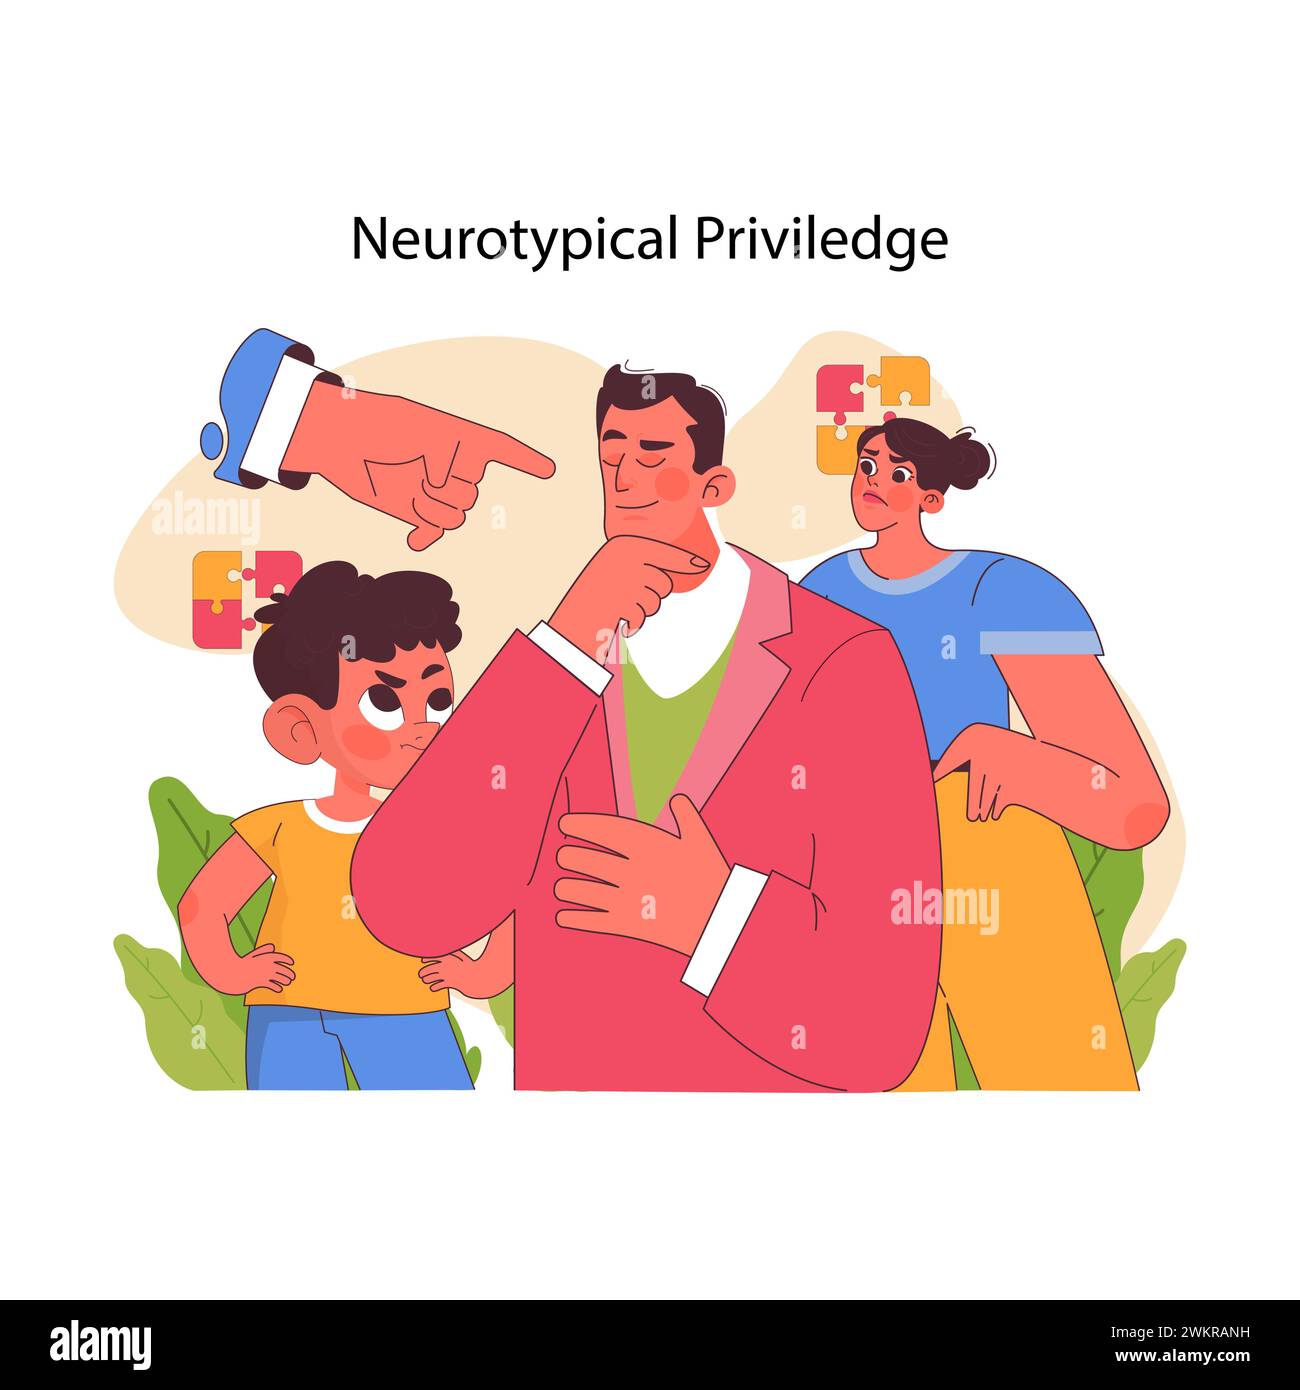 Neurotypical privilege concept. Man being chosen over woman and child. Delving into societal bias, the ease of fitting in, and the unseen advantages. Reflecting on inclusion and fairness. Stock Vector